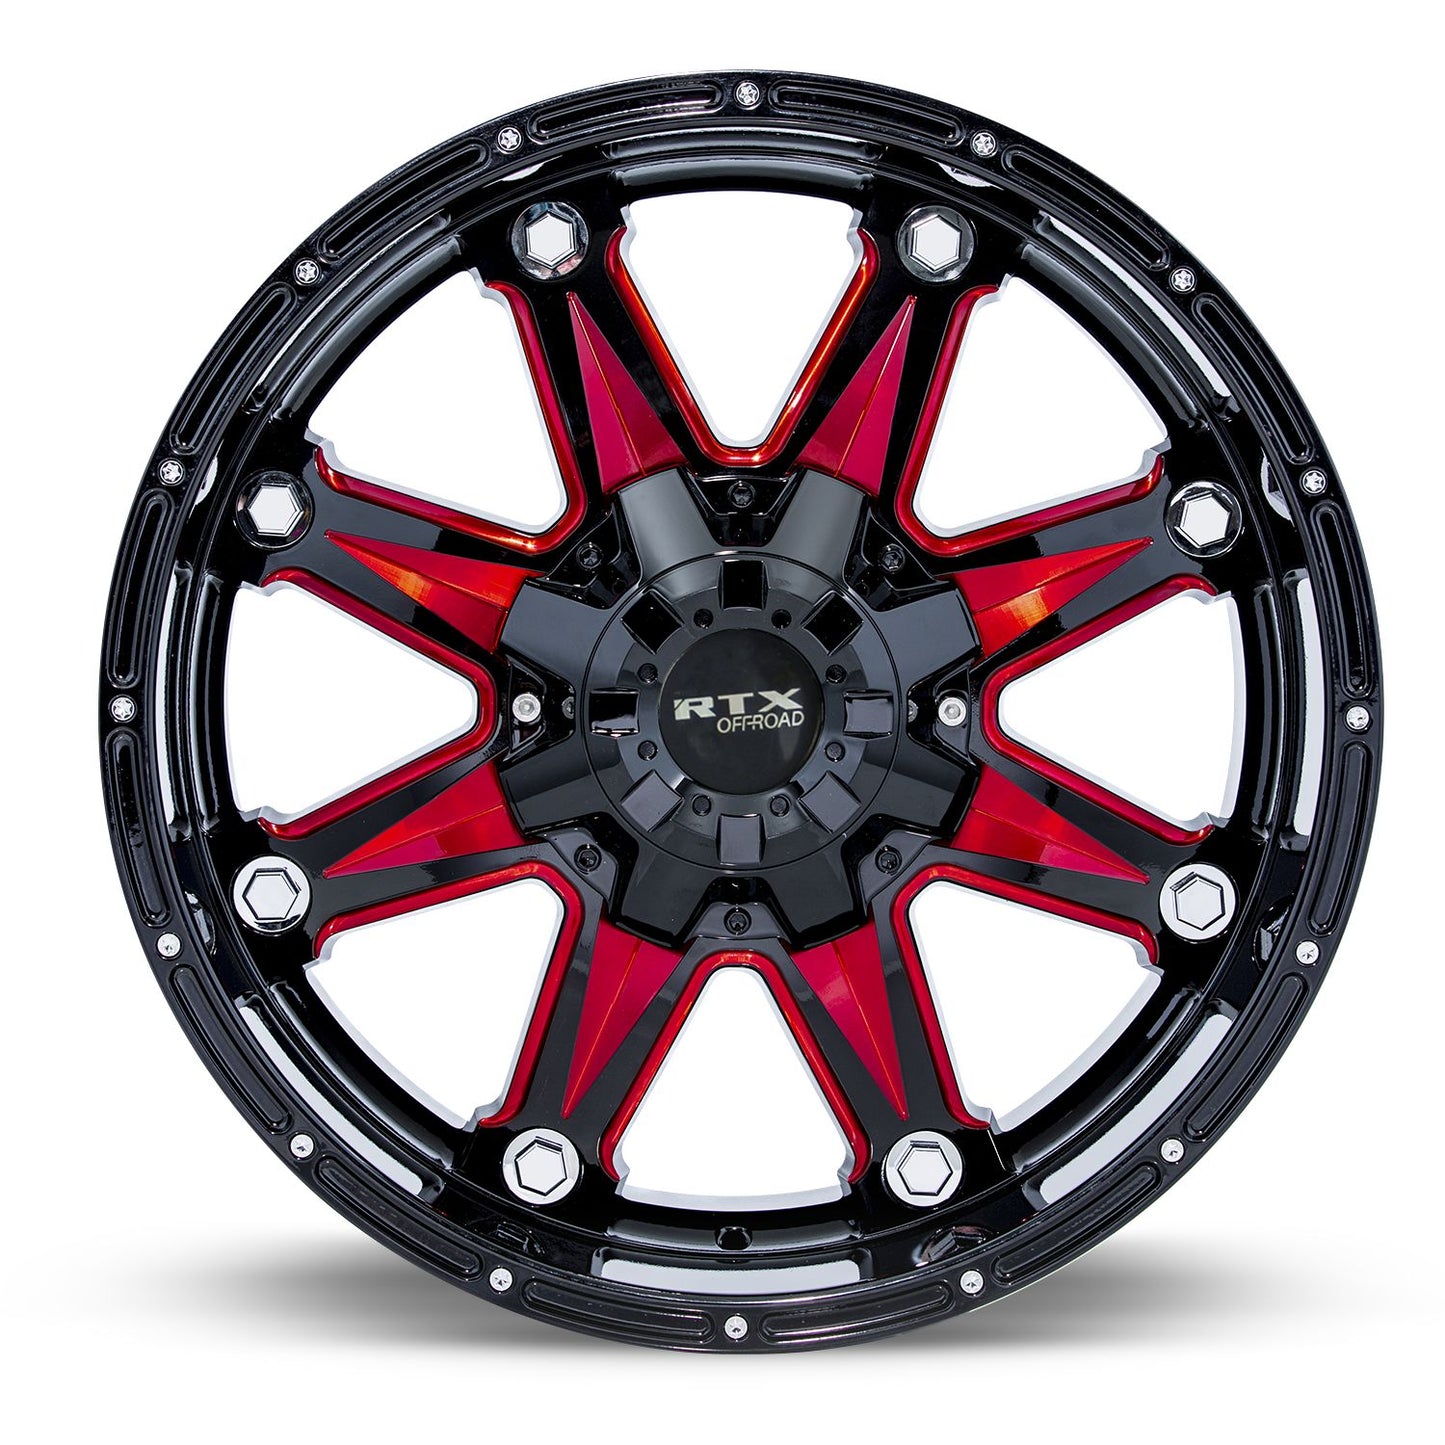 Spine - Black with Milled Red Spokes